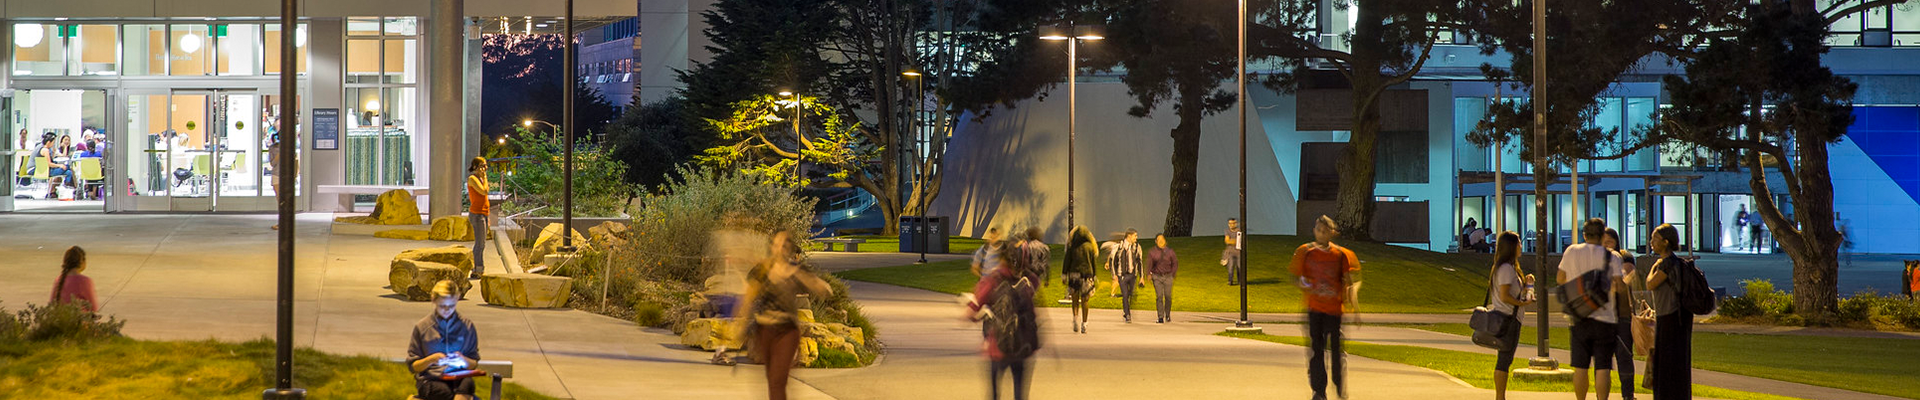 students walking in front of library at night